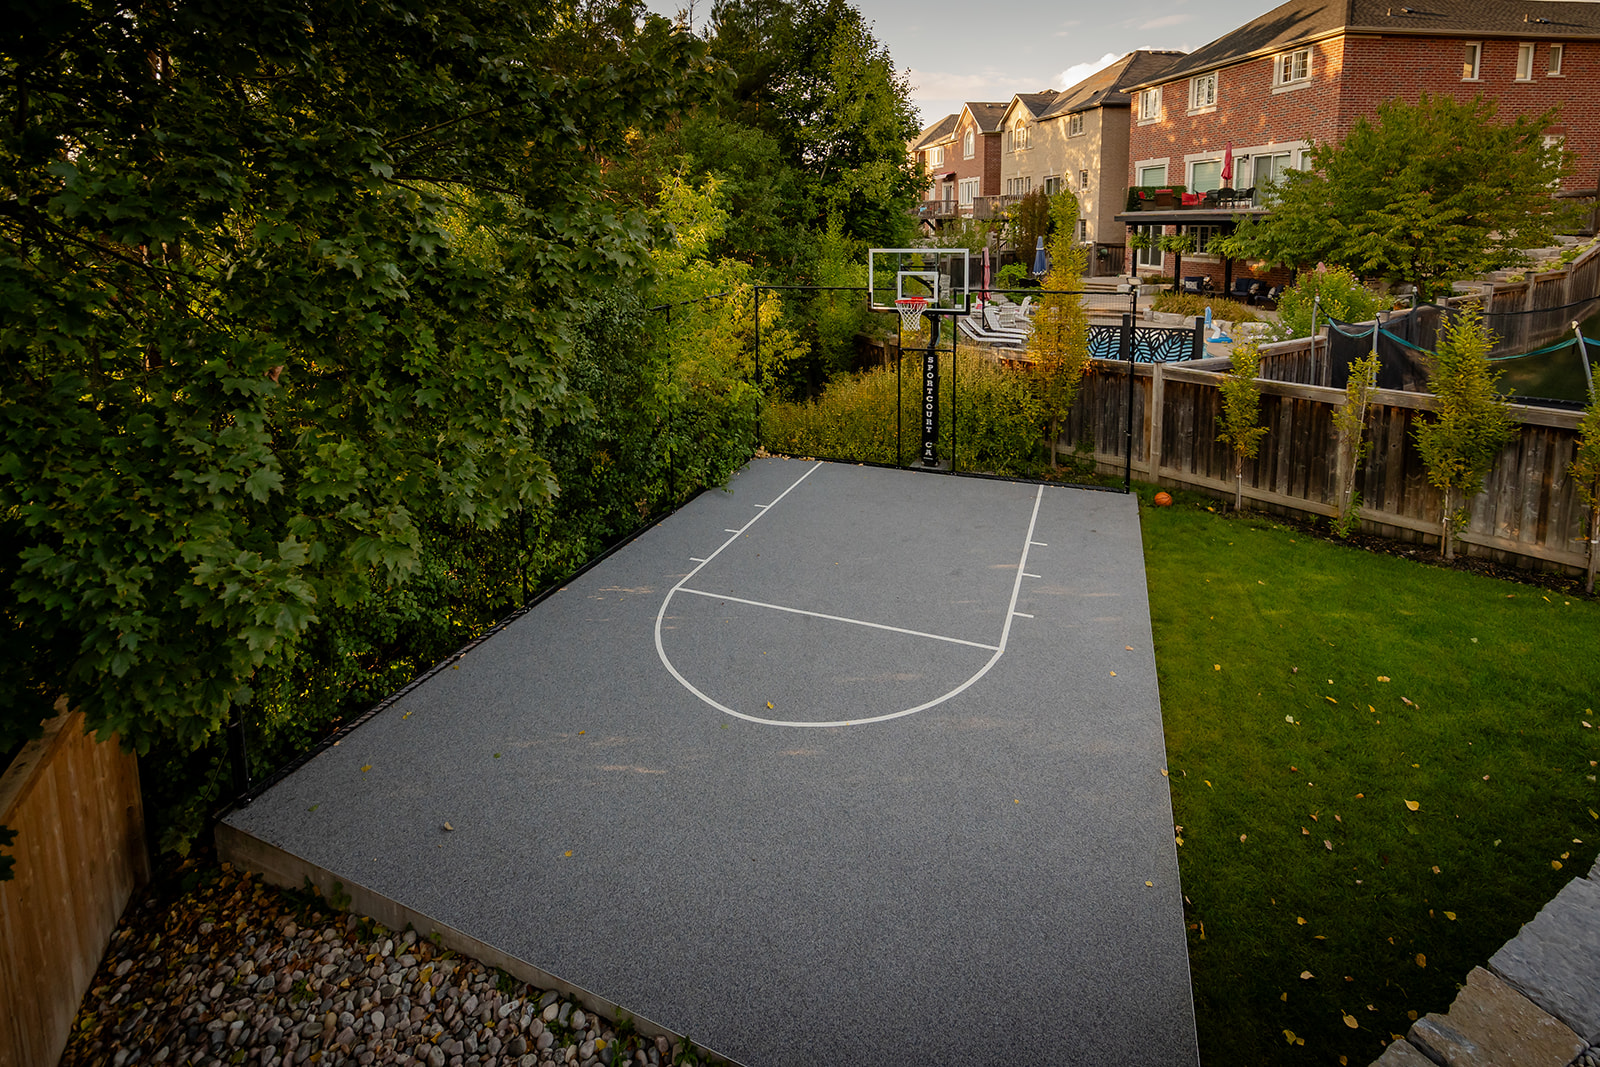 A practice basketball court with one net.